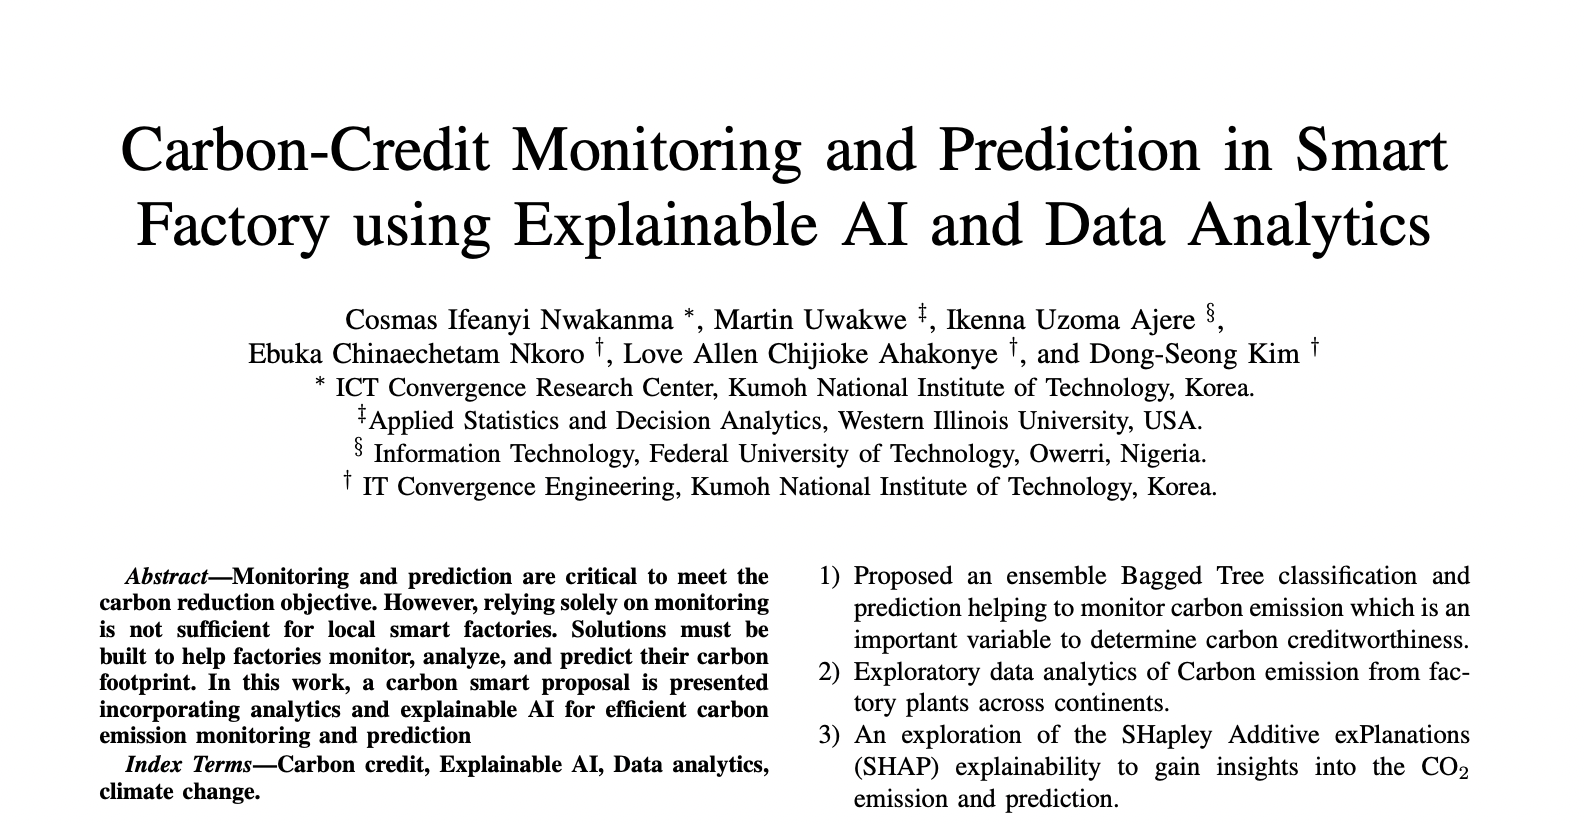 Carbon-Credit Monitoring and Prediction in Smart Factory using Explainable AI and Data Analytics